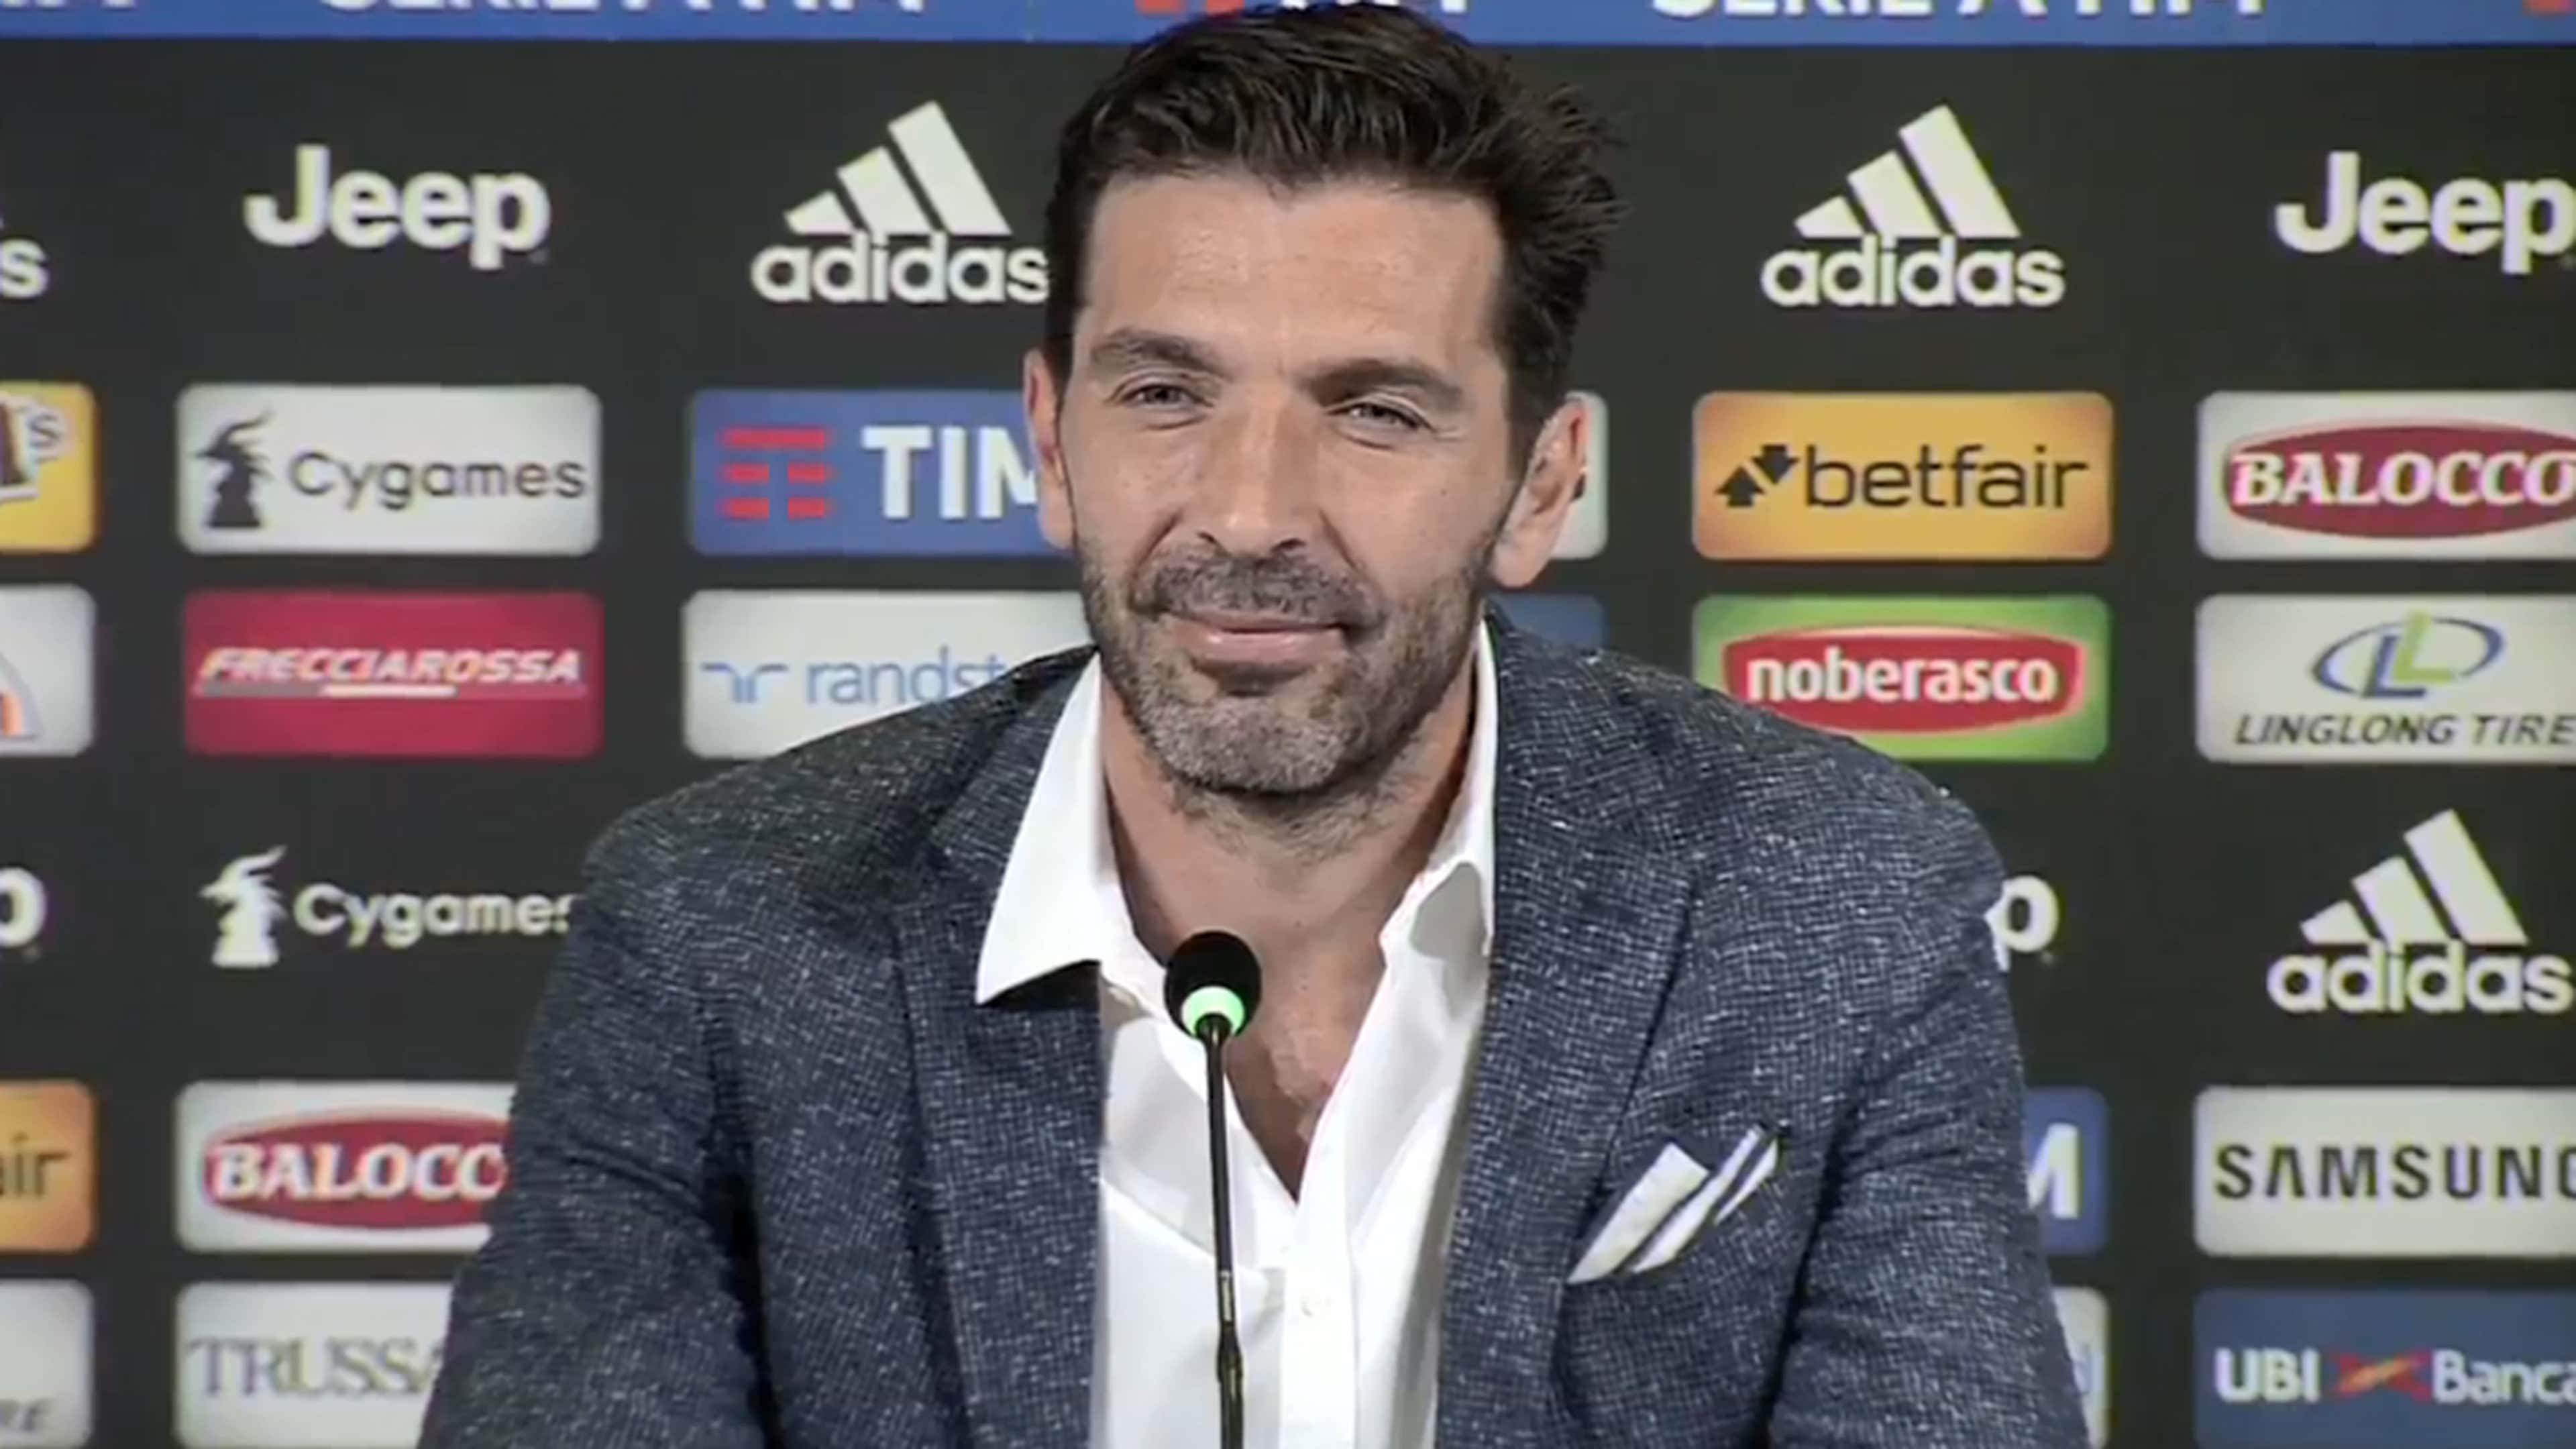 Buffon and Bonucci speak on final press conference before Juventus